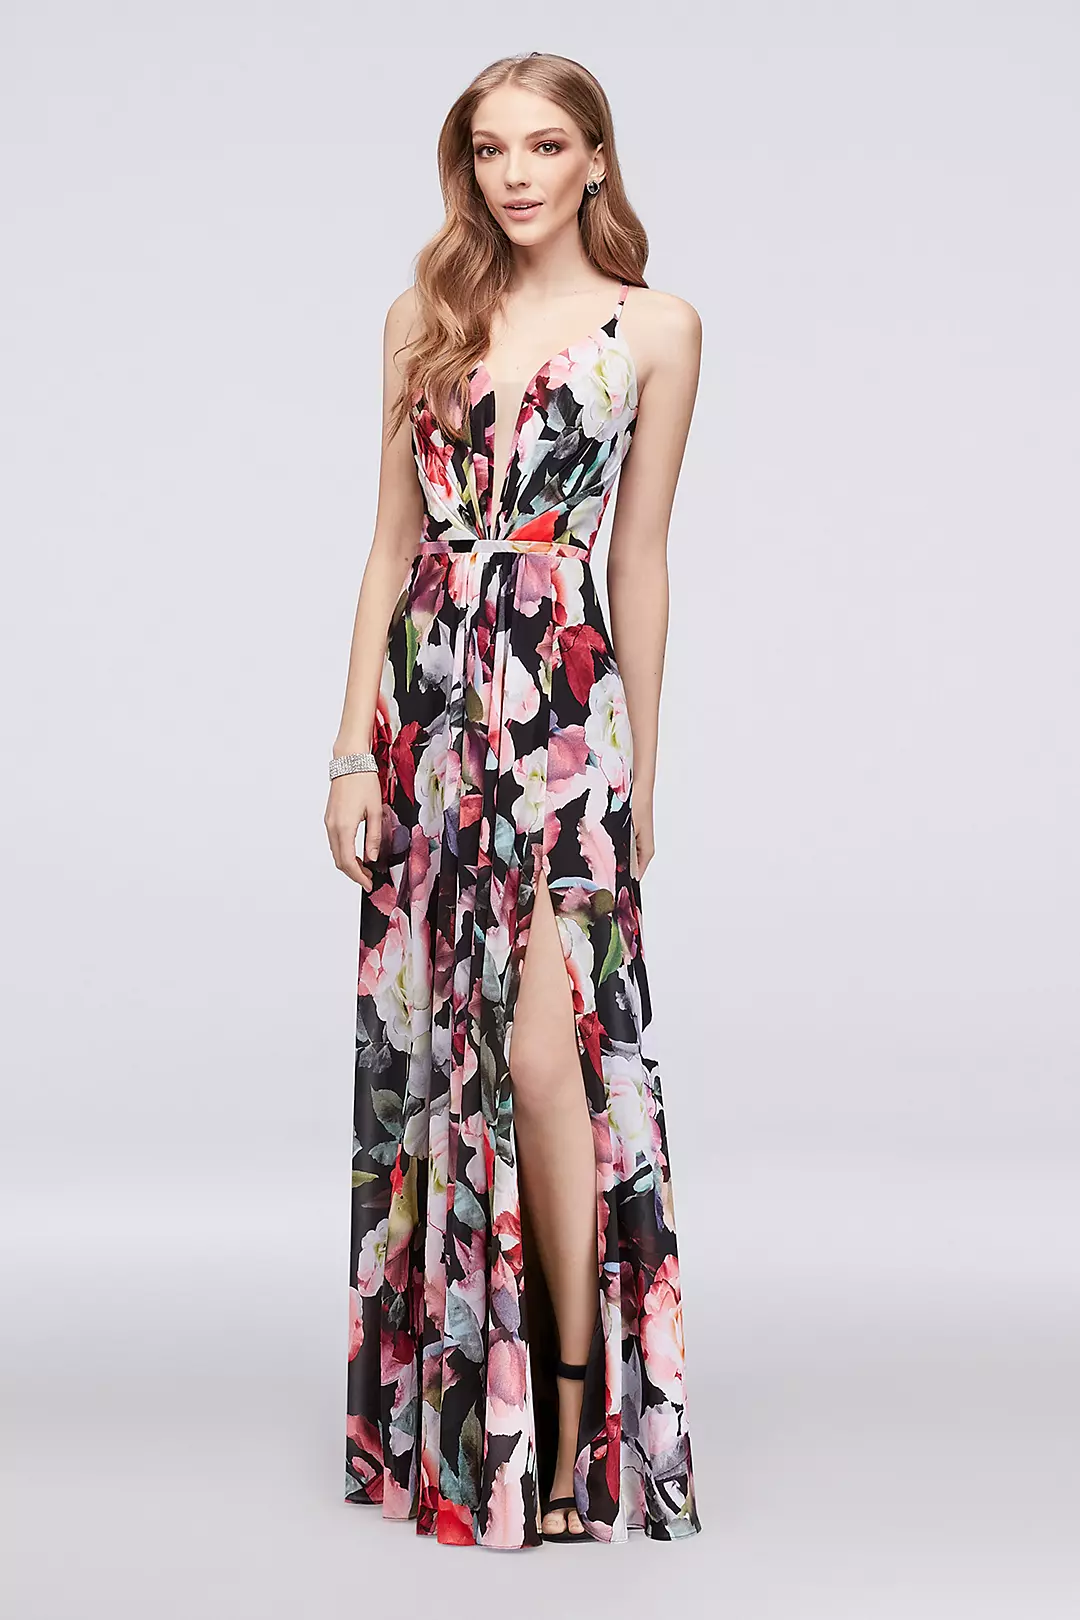 A-Line Floral Chiffon Gown with Slit Skirt Image